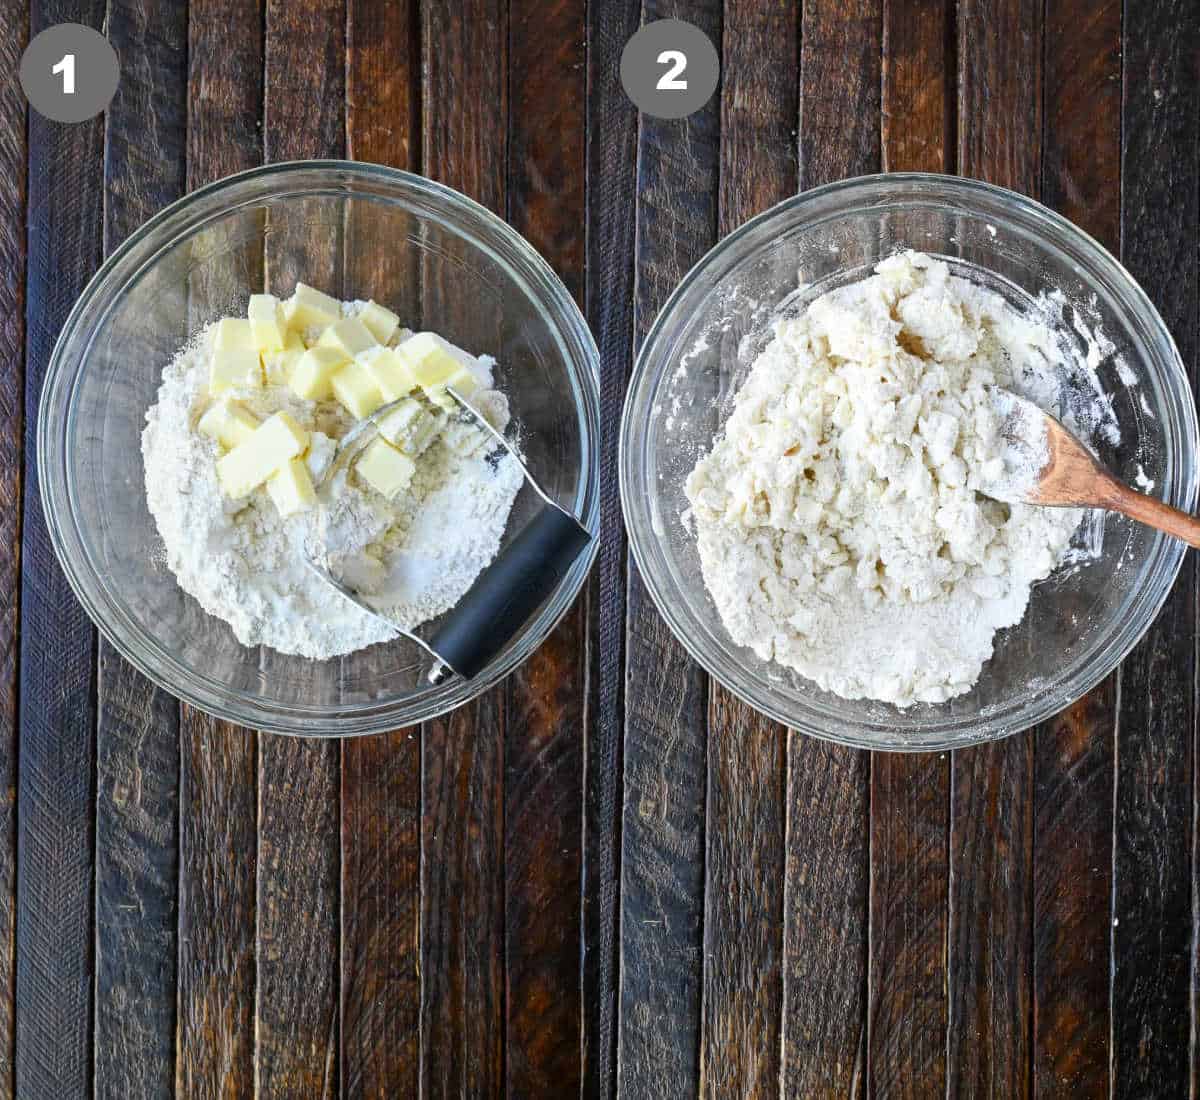 Pie crust ingredients mixed together in a bowl.